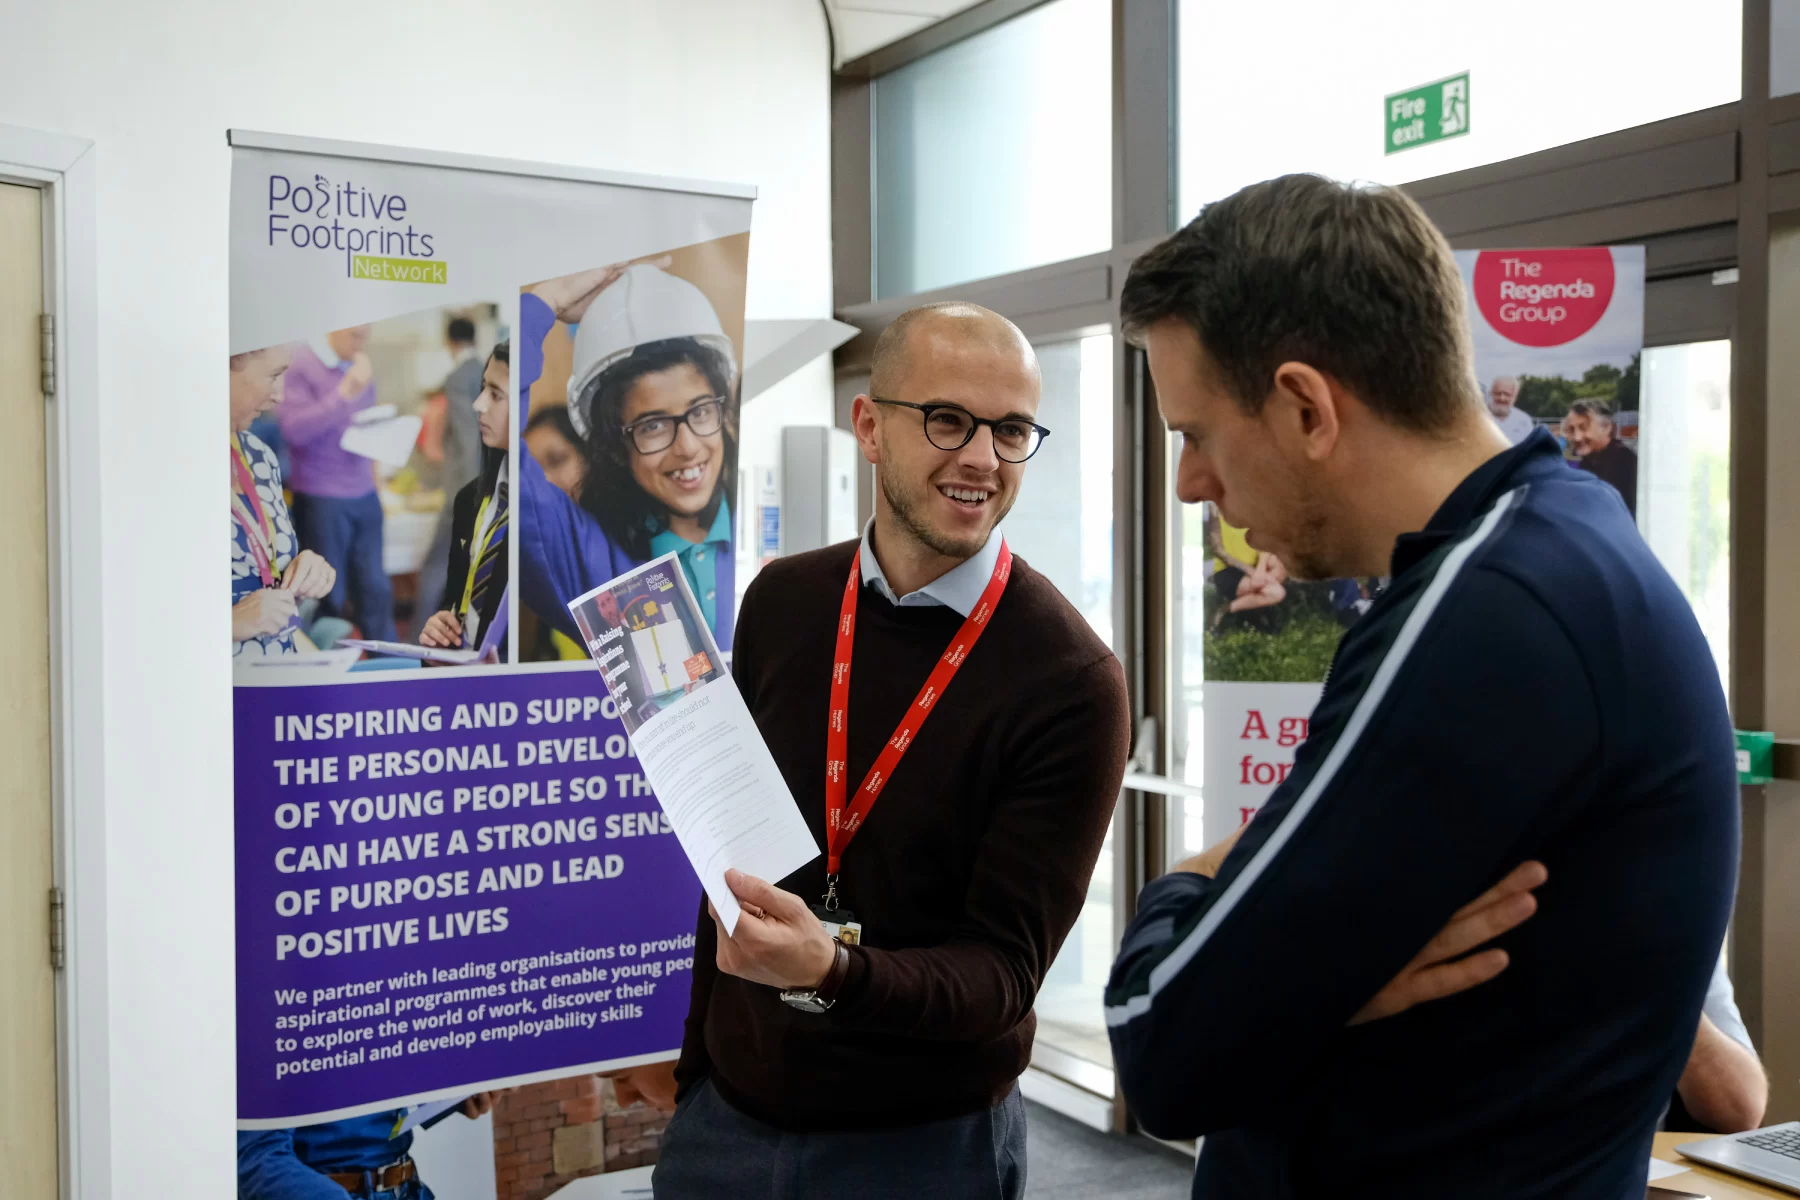 Josh Cliff, head of service at Positive footprints shows a brochure to a teacher in front of a pull up banner featuring young people learning.